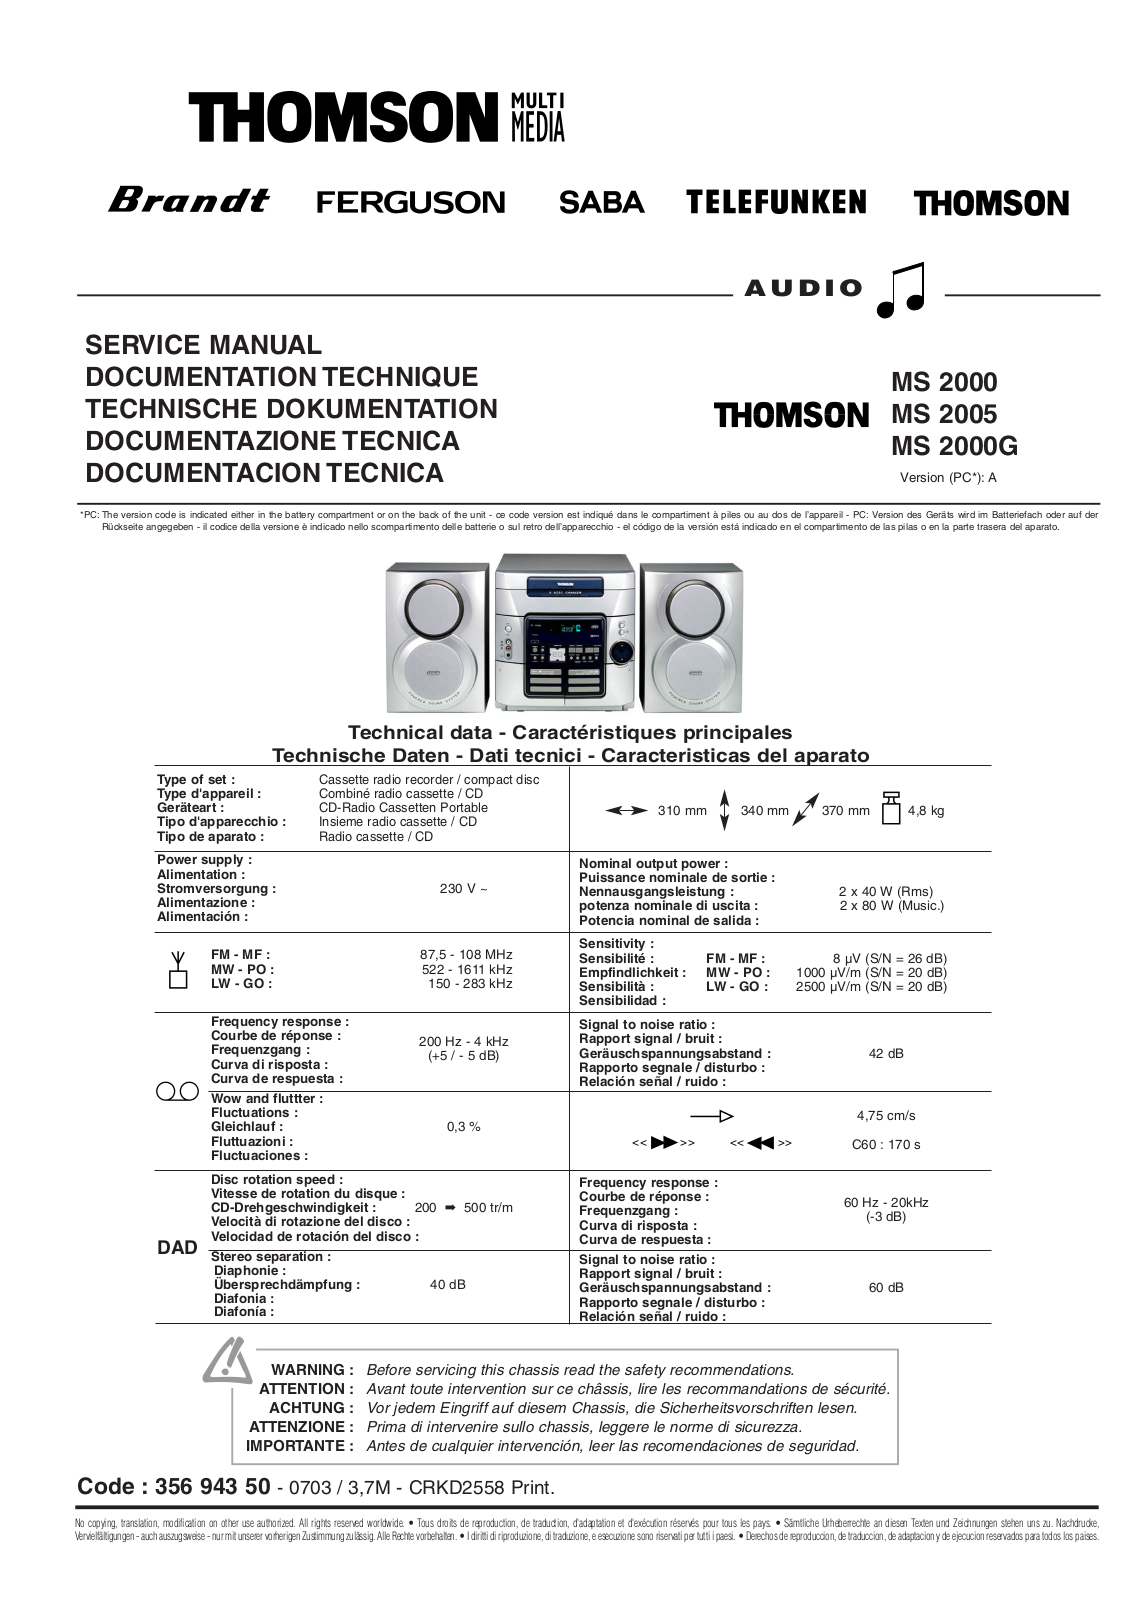 Thomson MS2000, MS2005, CRKD2558 Schematic